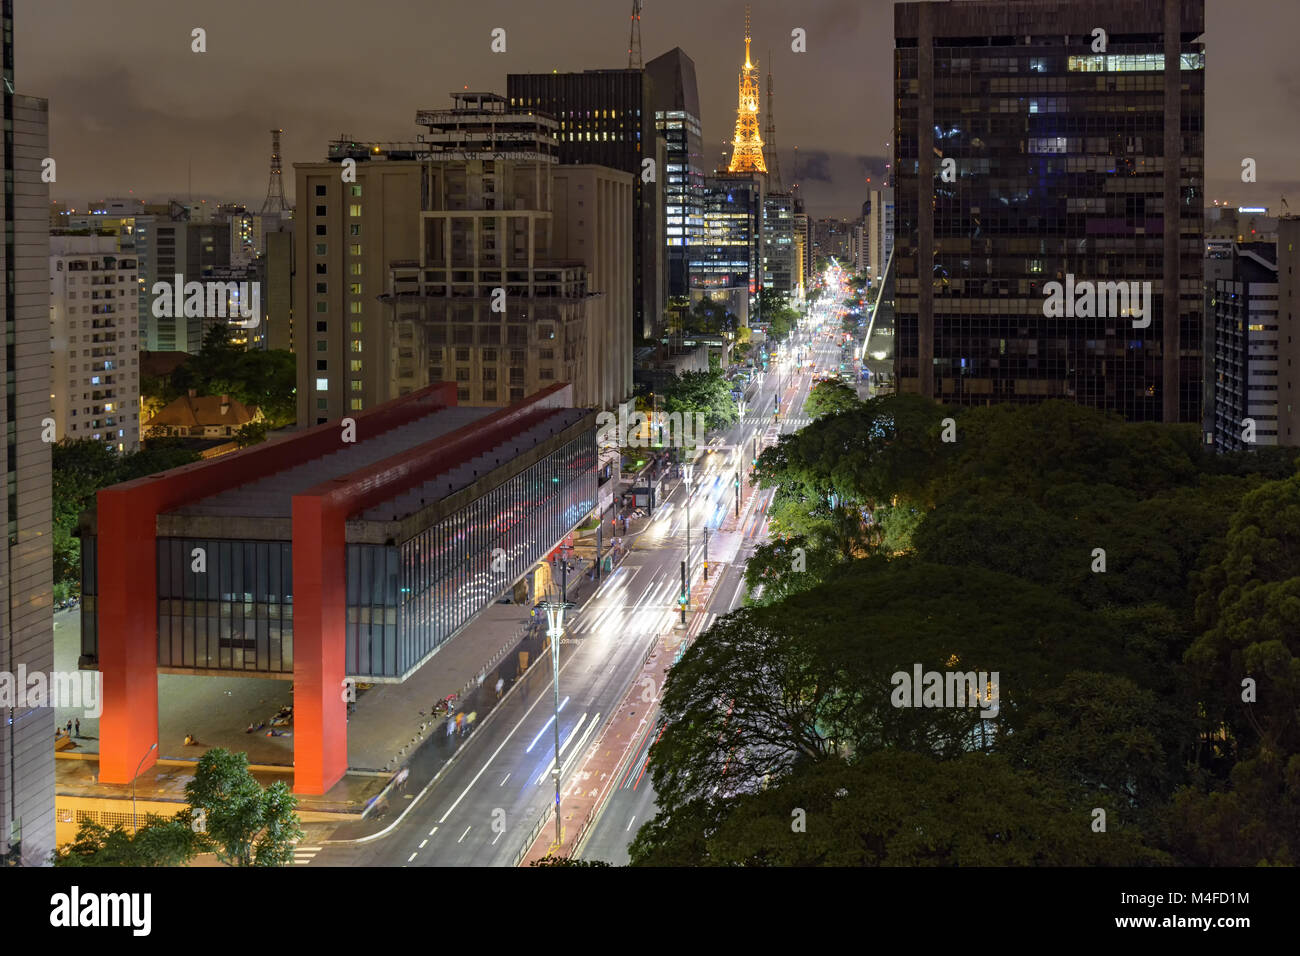 Sao Paulo/Brazil: Decathlon, Forever21 Stores, in Paulista Avenue, Night  Editorial Photography - Image of avenue, downtown: 174237562